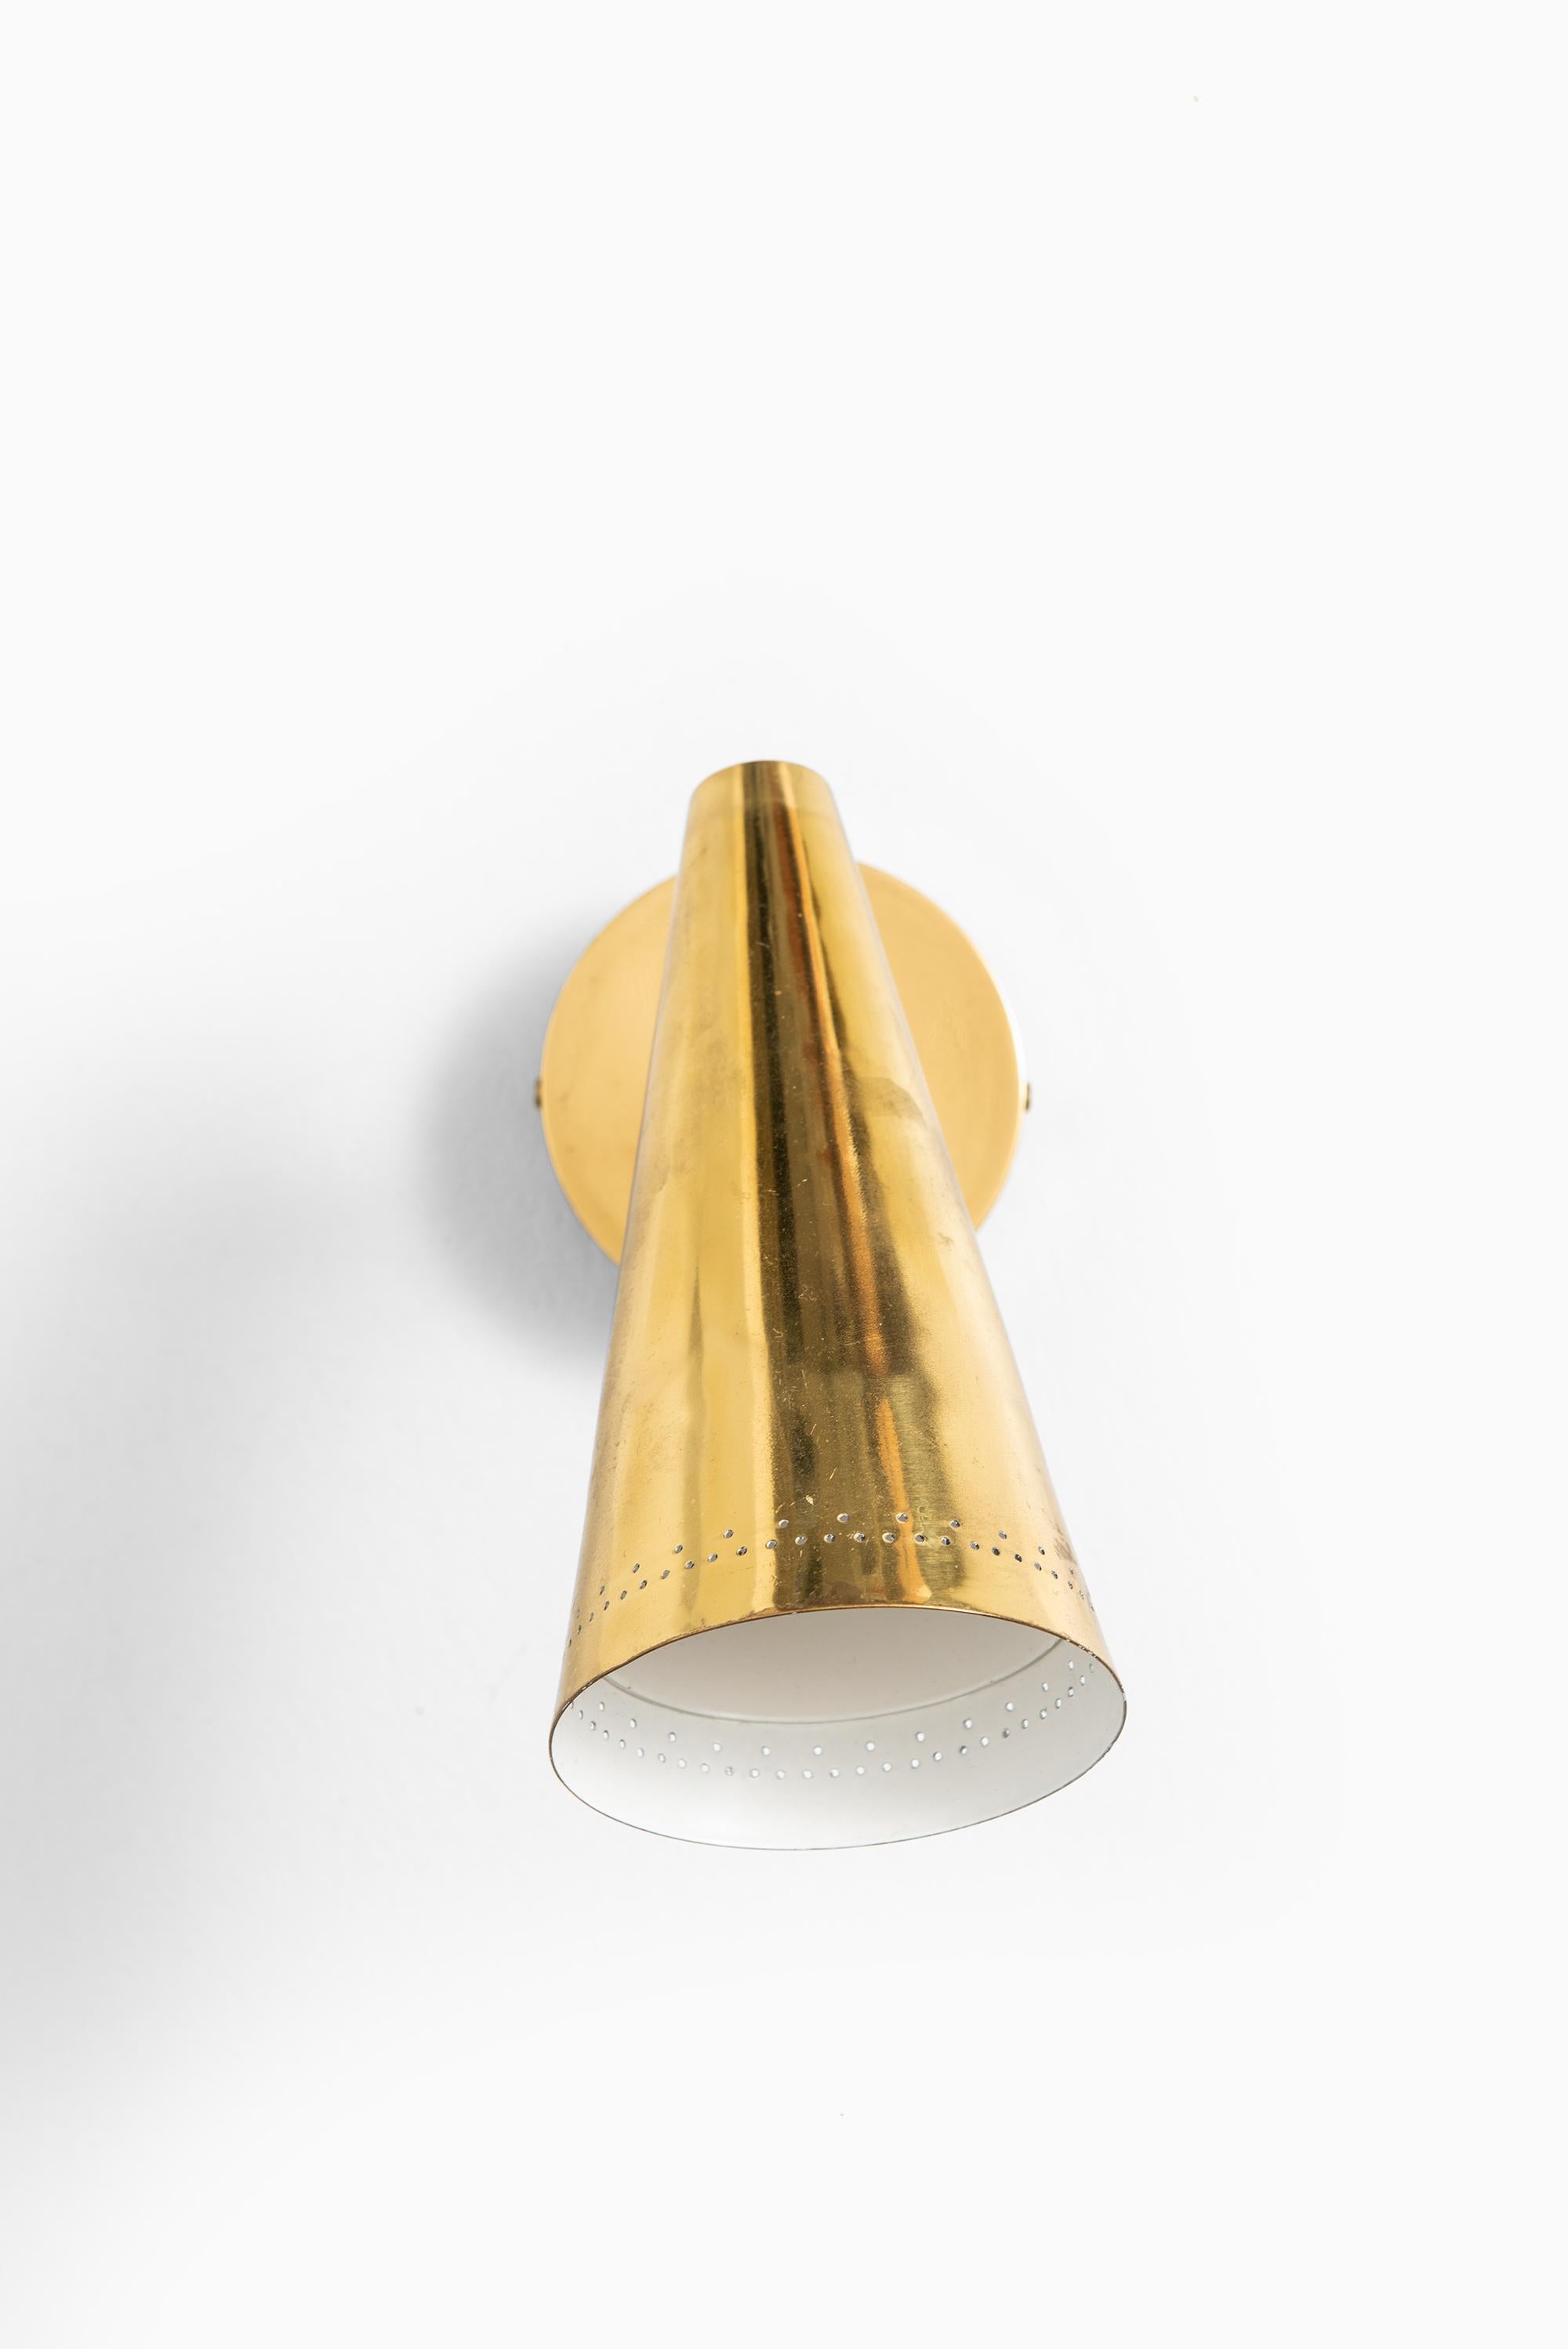 Wall lamps in brass attributed to Lisa Johansson-Pape. Produced in Finland.